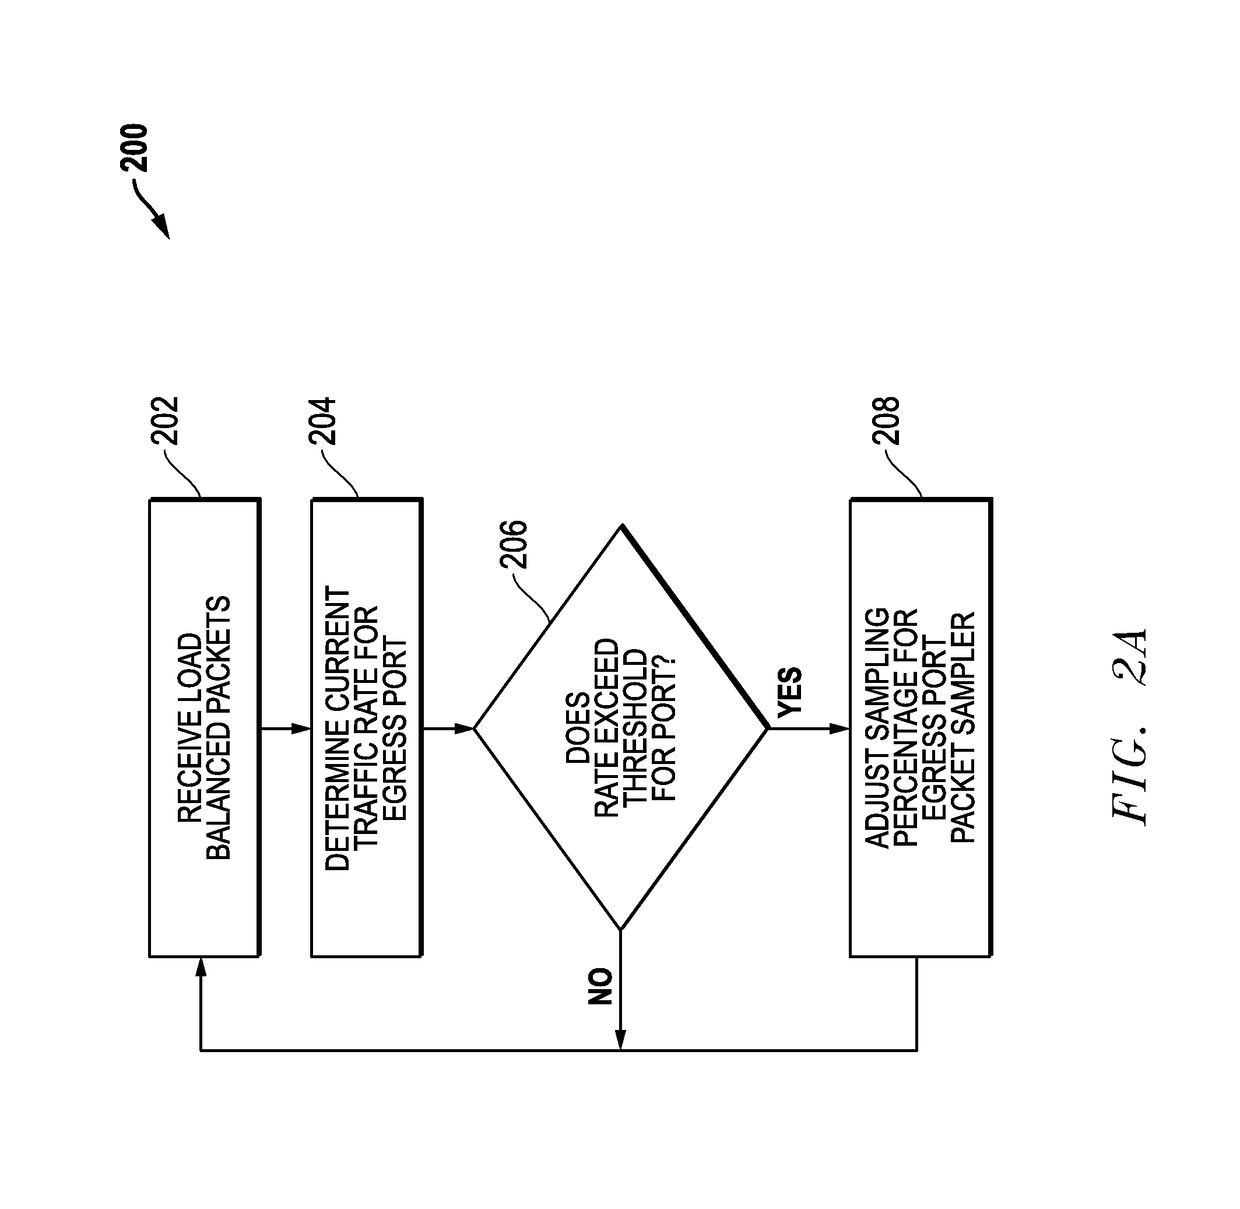 Egress port overload protection for network packet forwarding systems